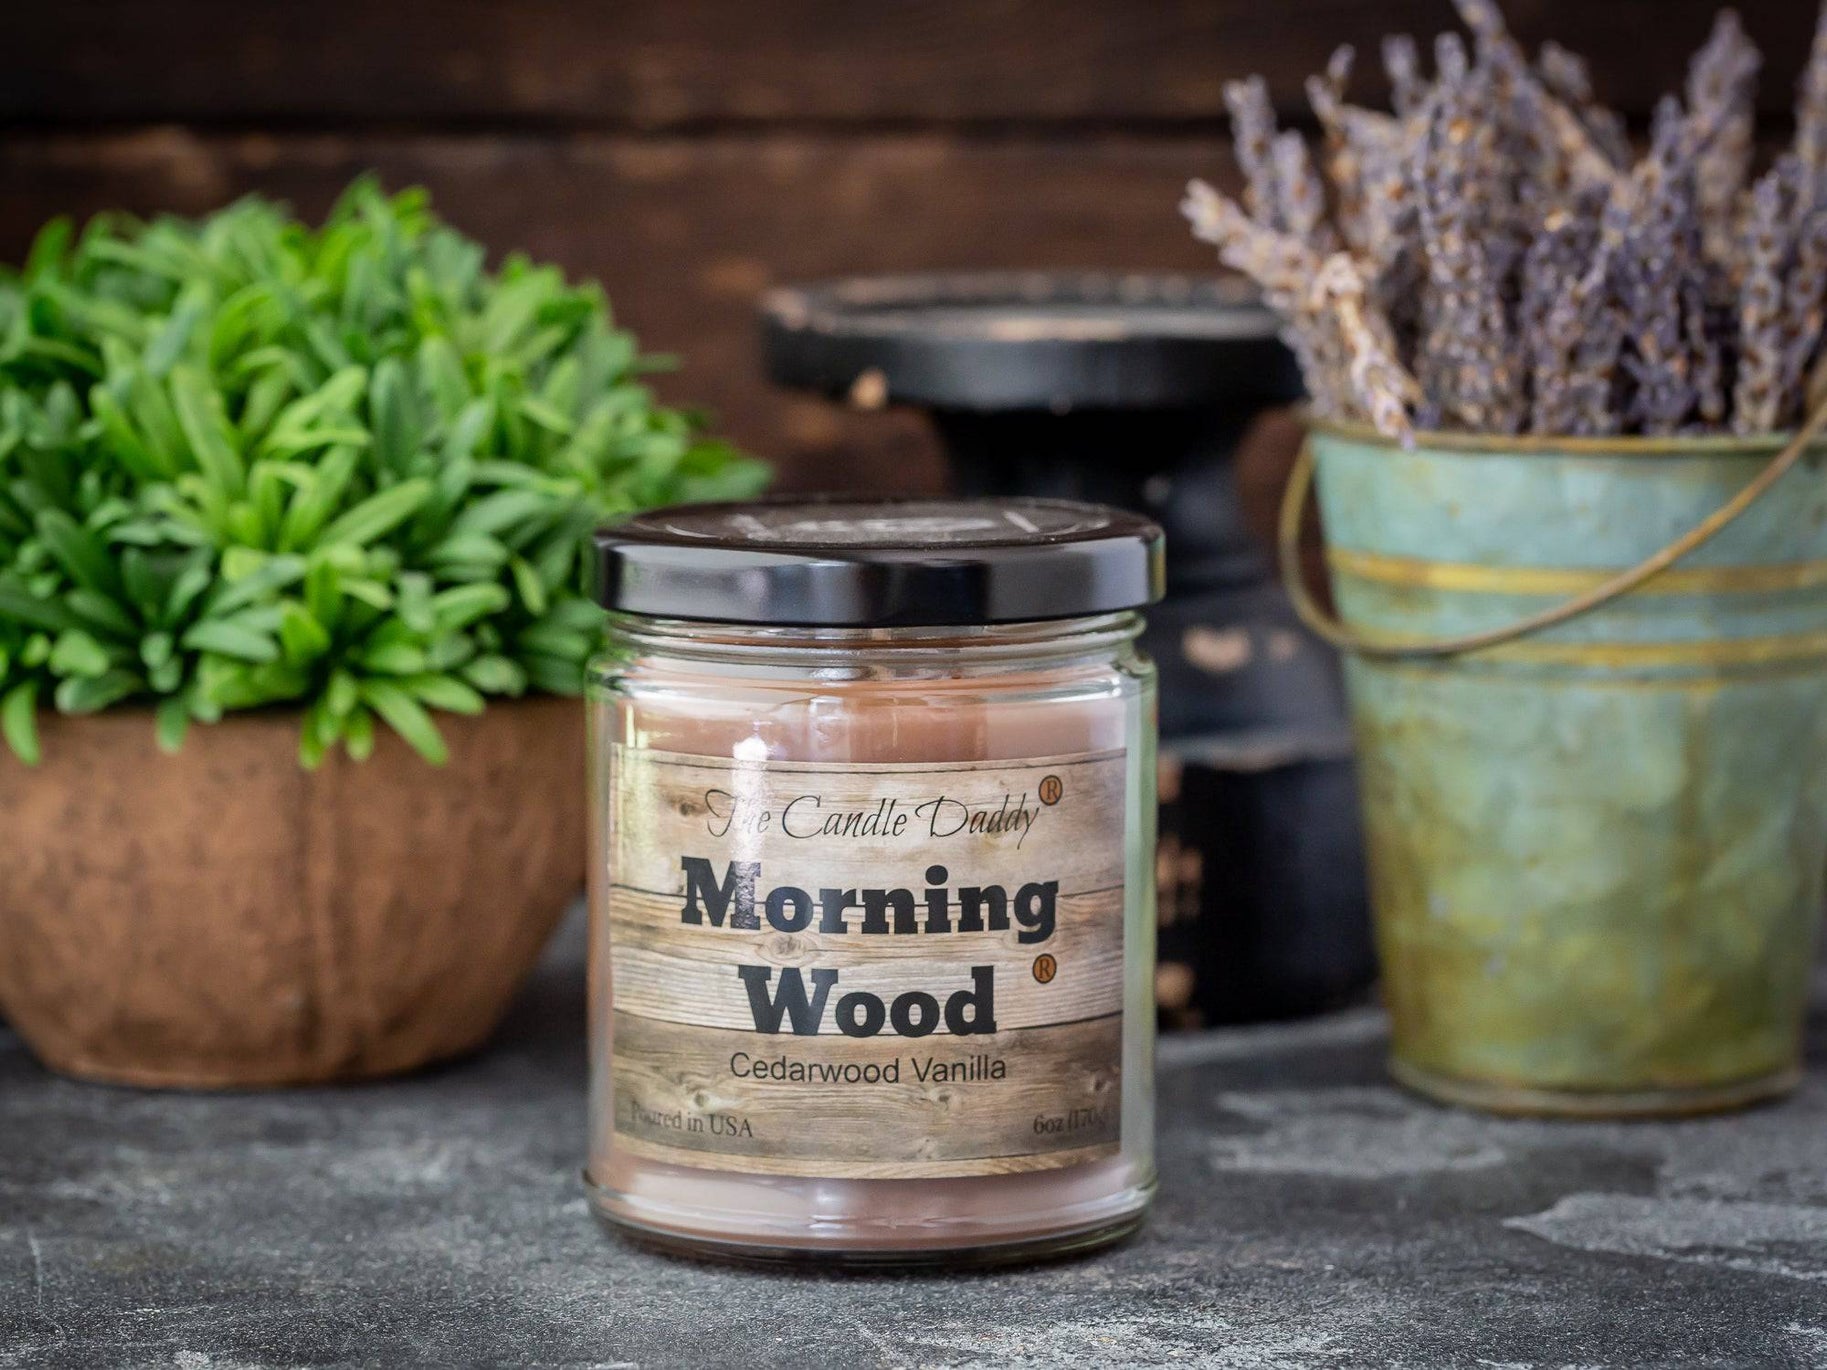 The Candle Daddy - Morning Wood - Sandalwood Scented Wax Melt